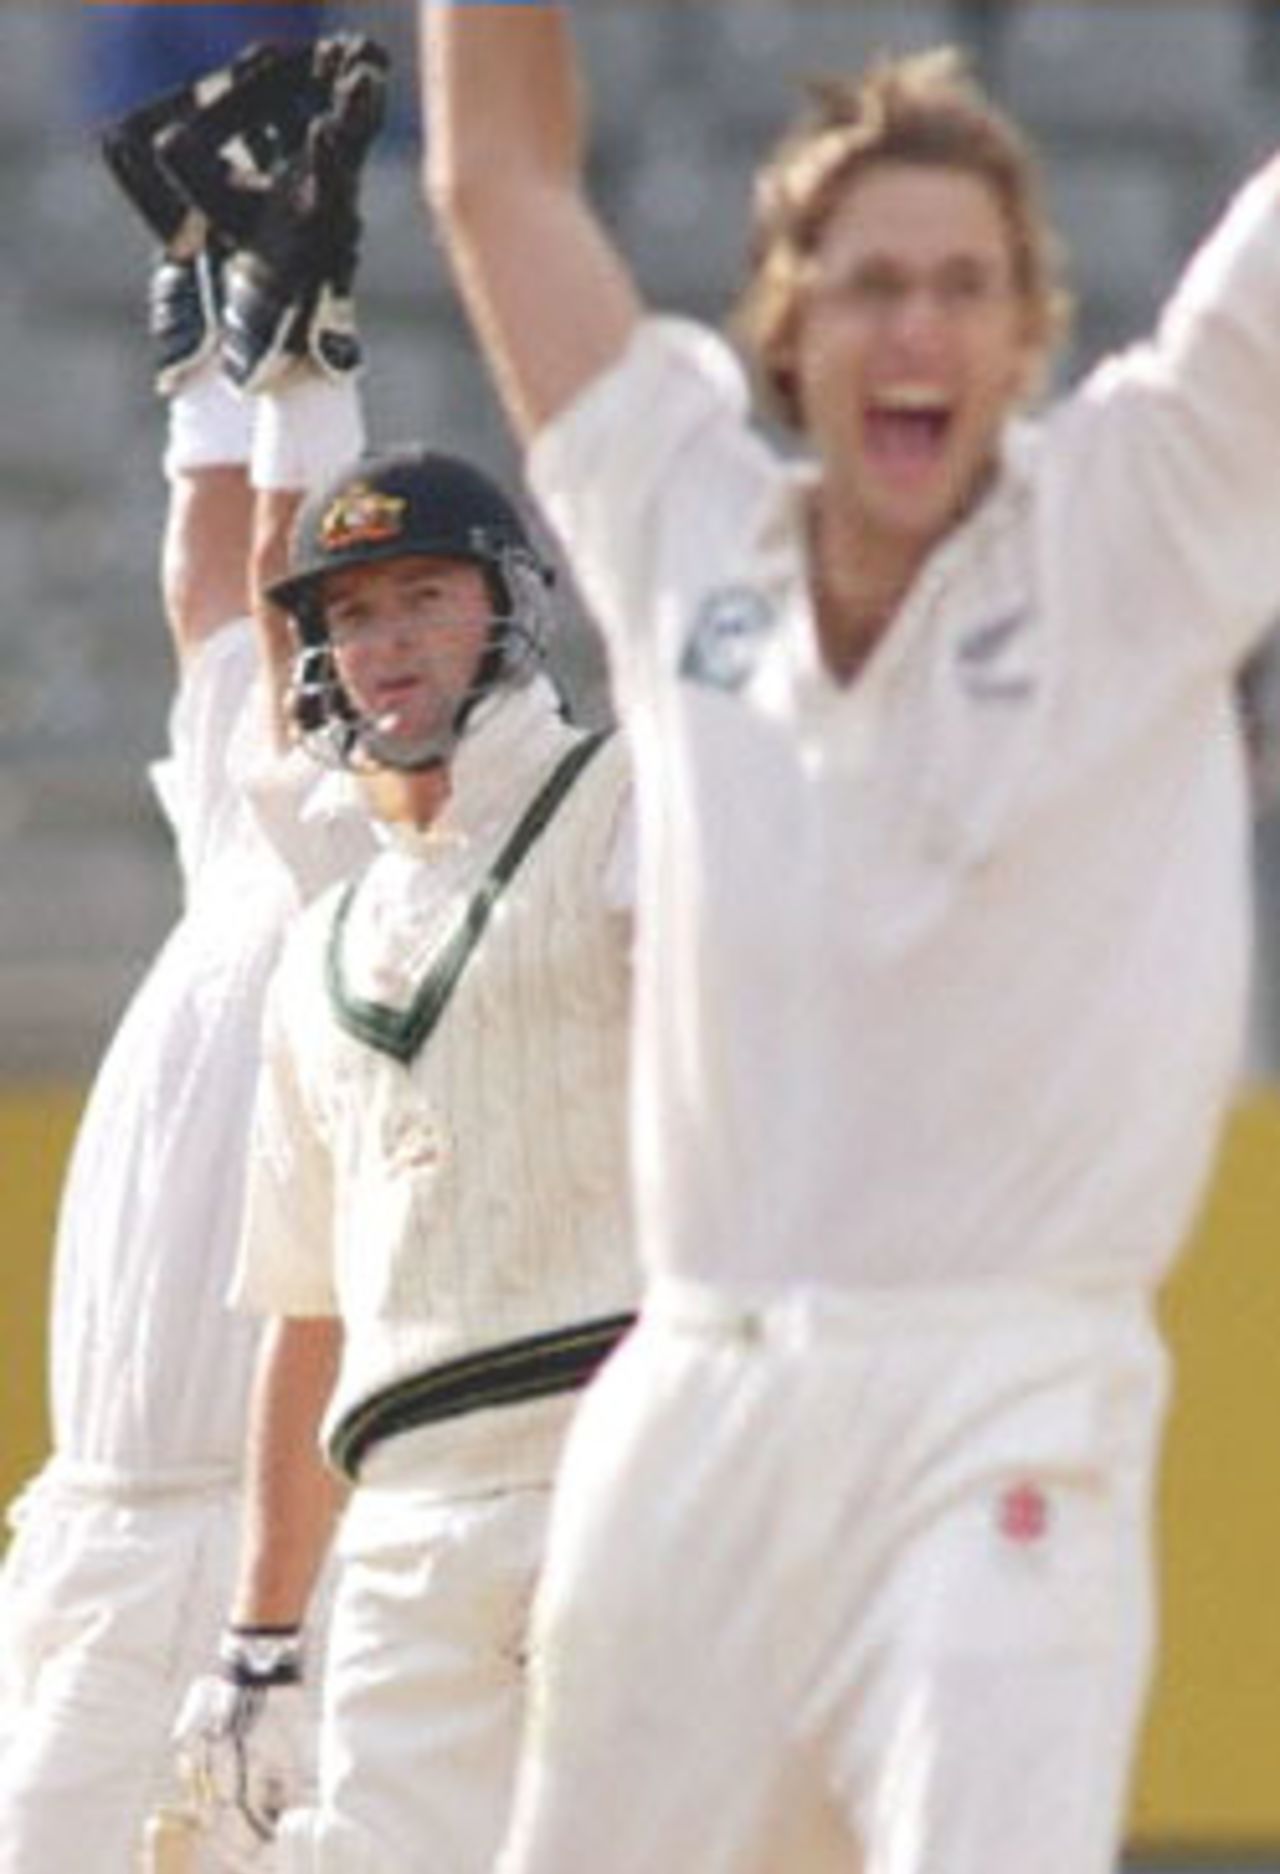 Australian batsman Mark Waugh (C) looks back down the pitch to see that he is out-caught behind to the delight of New Zealand bowler Daniel Vettori (R) and wicketkeeper Adam Parore (L) on the second day of the first Test Match being played at Eden Park in Auckland, 12 March 2000. Australia dismissed New Zealand for 163 in their first innings and Australia in their second innings is 114-5 for a lead of 165 runs at stumps.